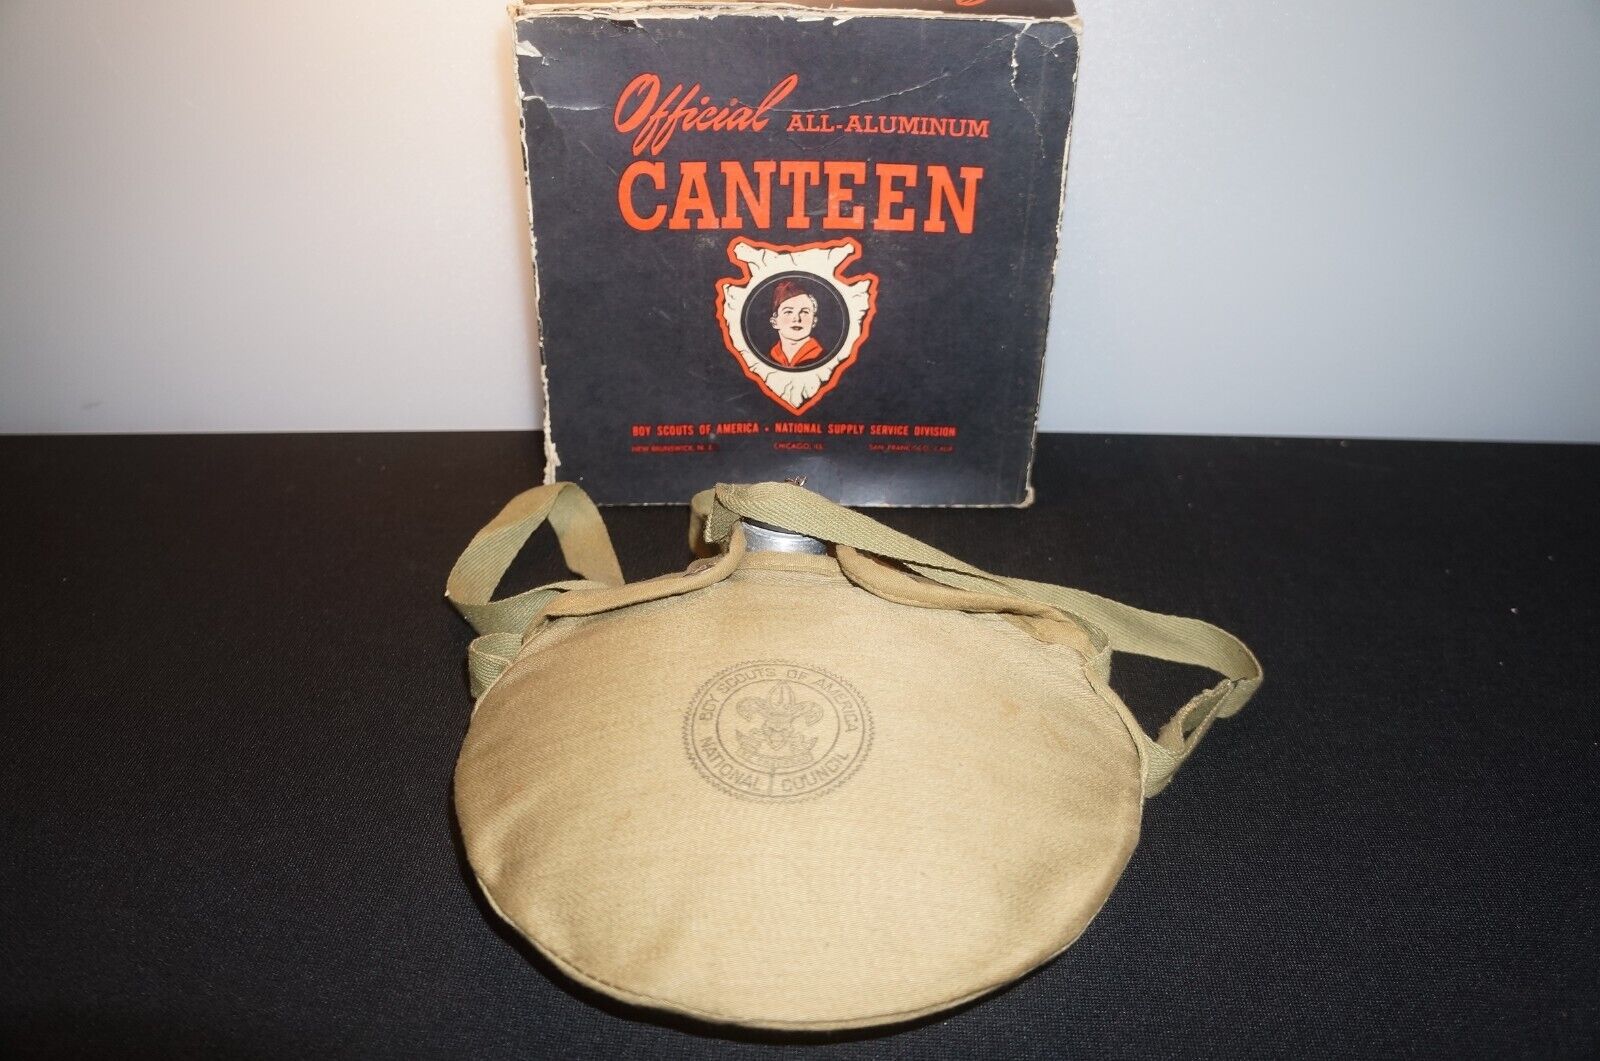 Vintage Official Boy Scouts of America Aluminum Canteen in Original Box No. 1201